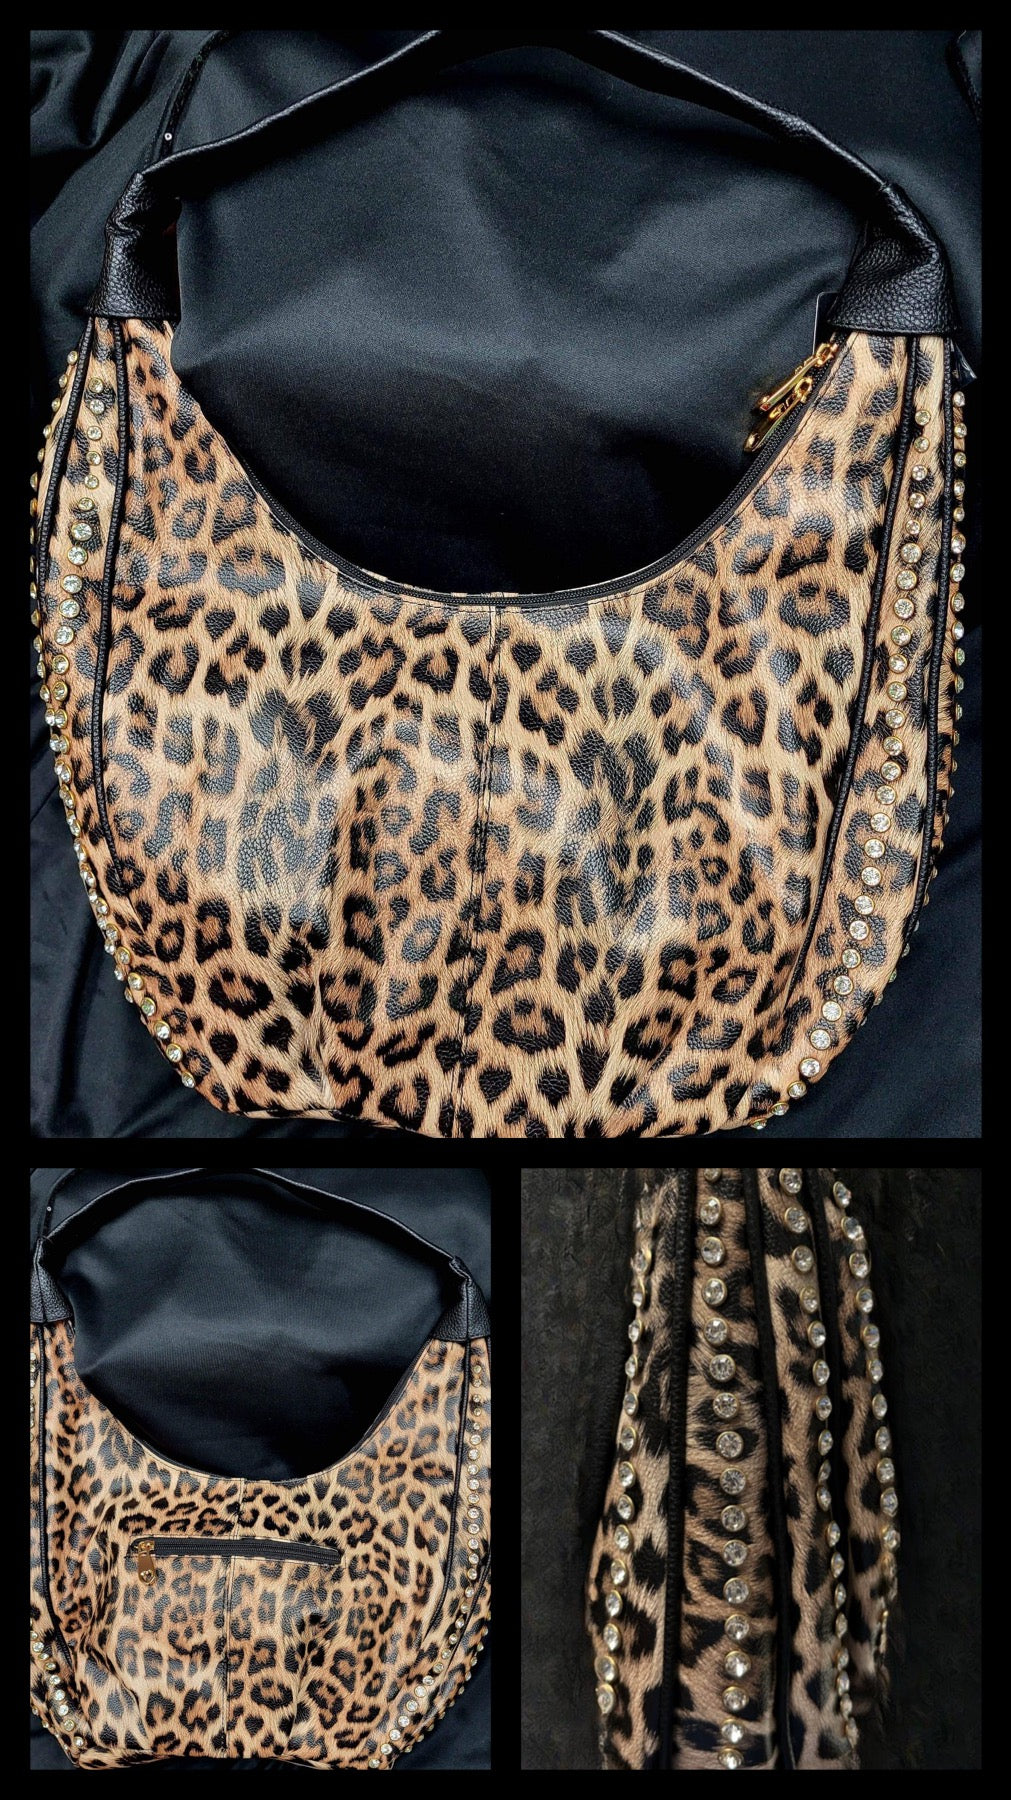 LARGE BEAUTIFUL LEOPARD PRINT HANDBAG WITH 4 ROWS OF BLING ON THE SIDES - Lil Monkey Boutique